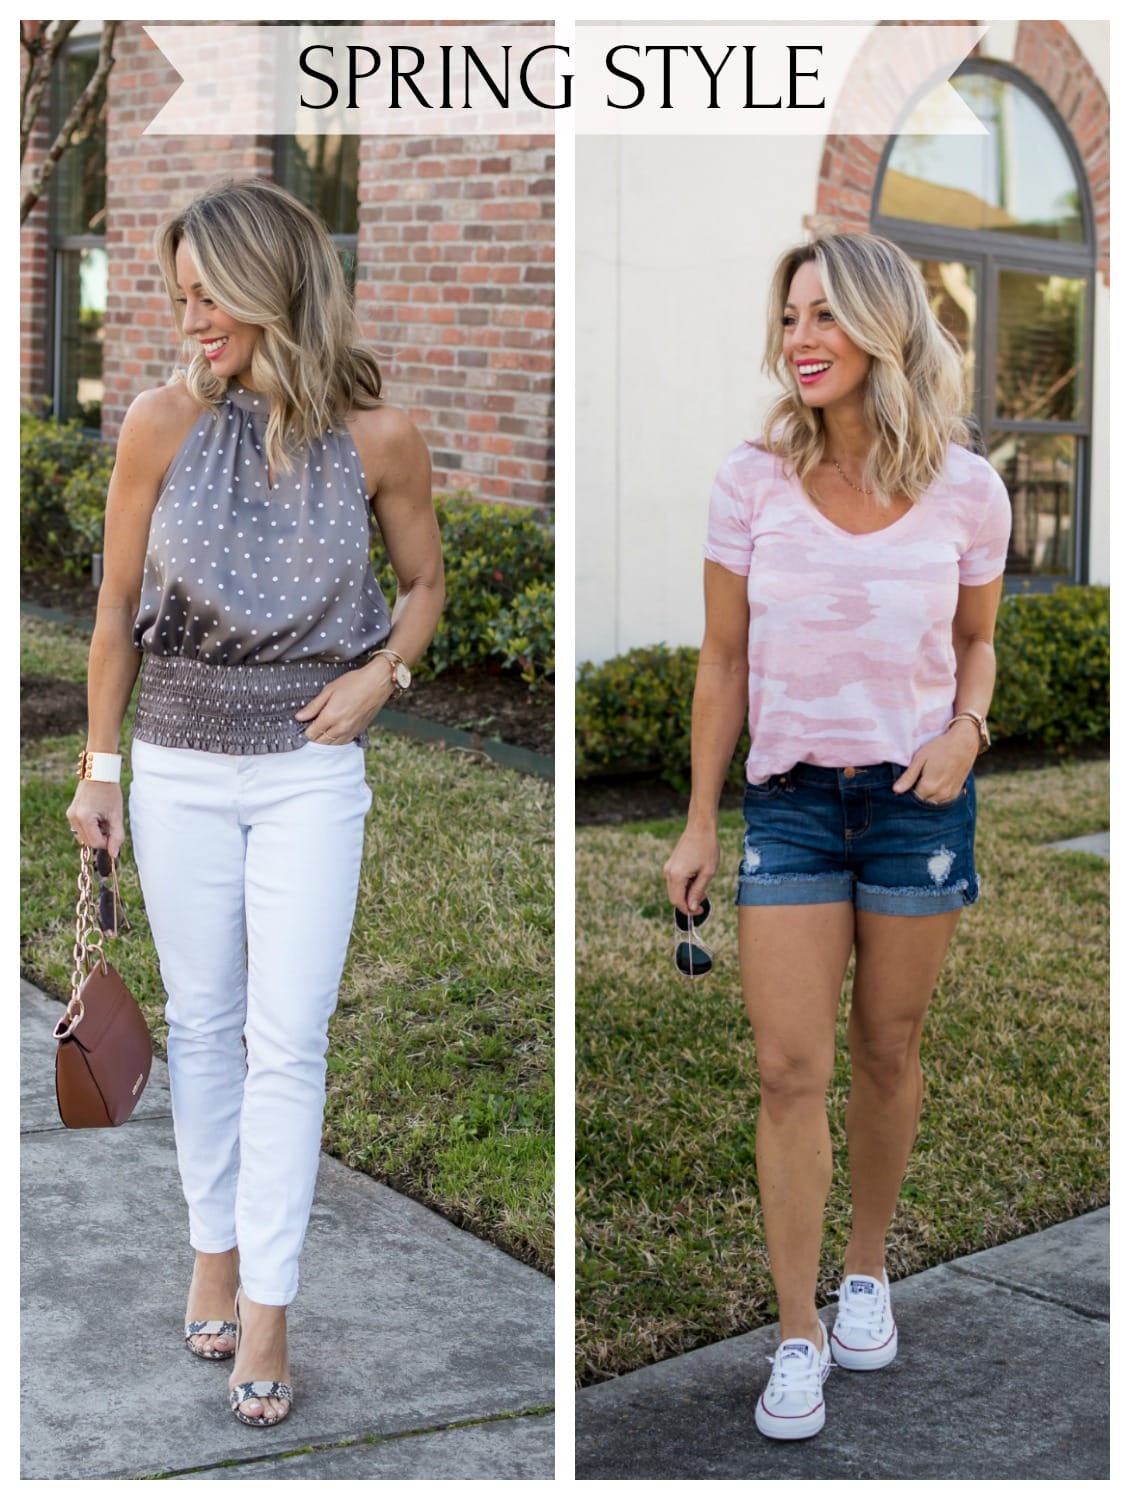 SPRING STYLE | White Jeans and Shorts